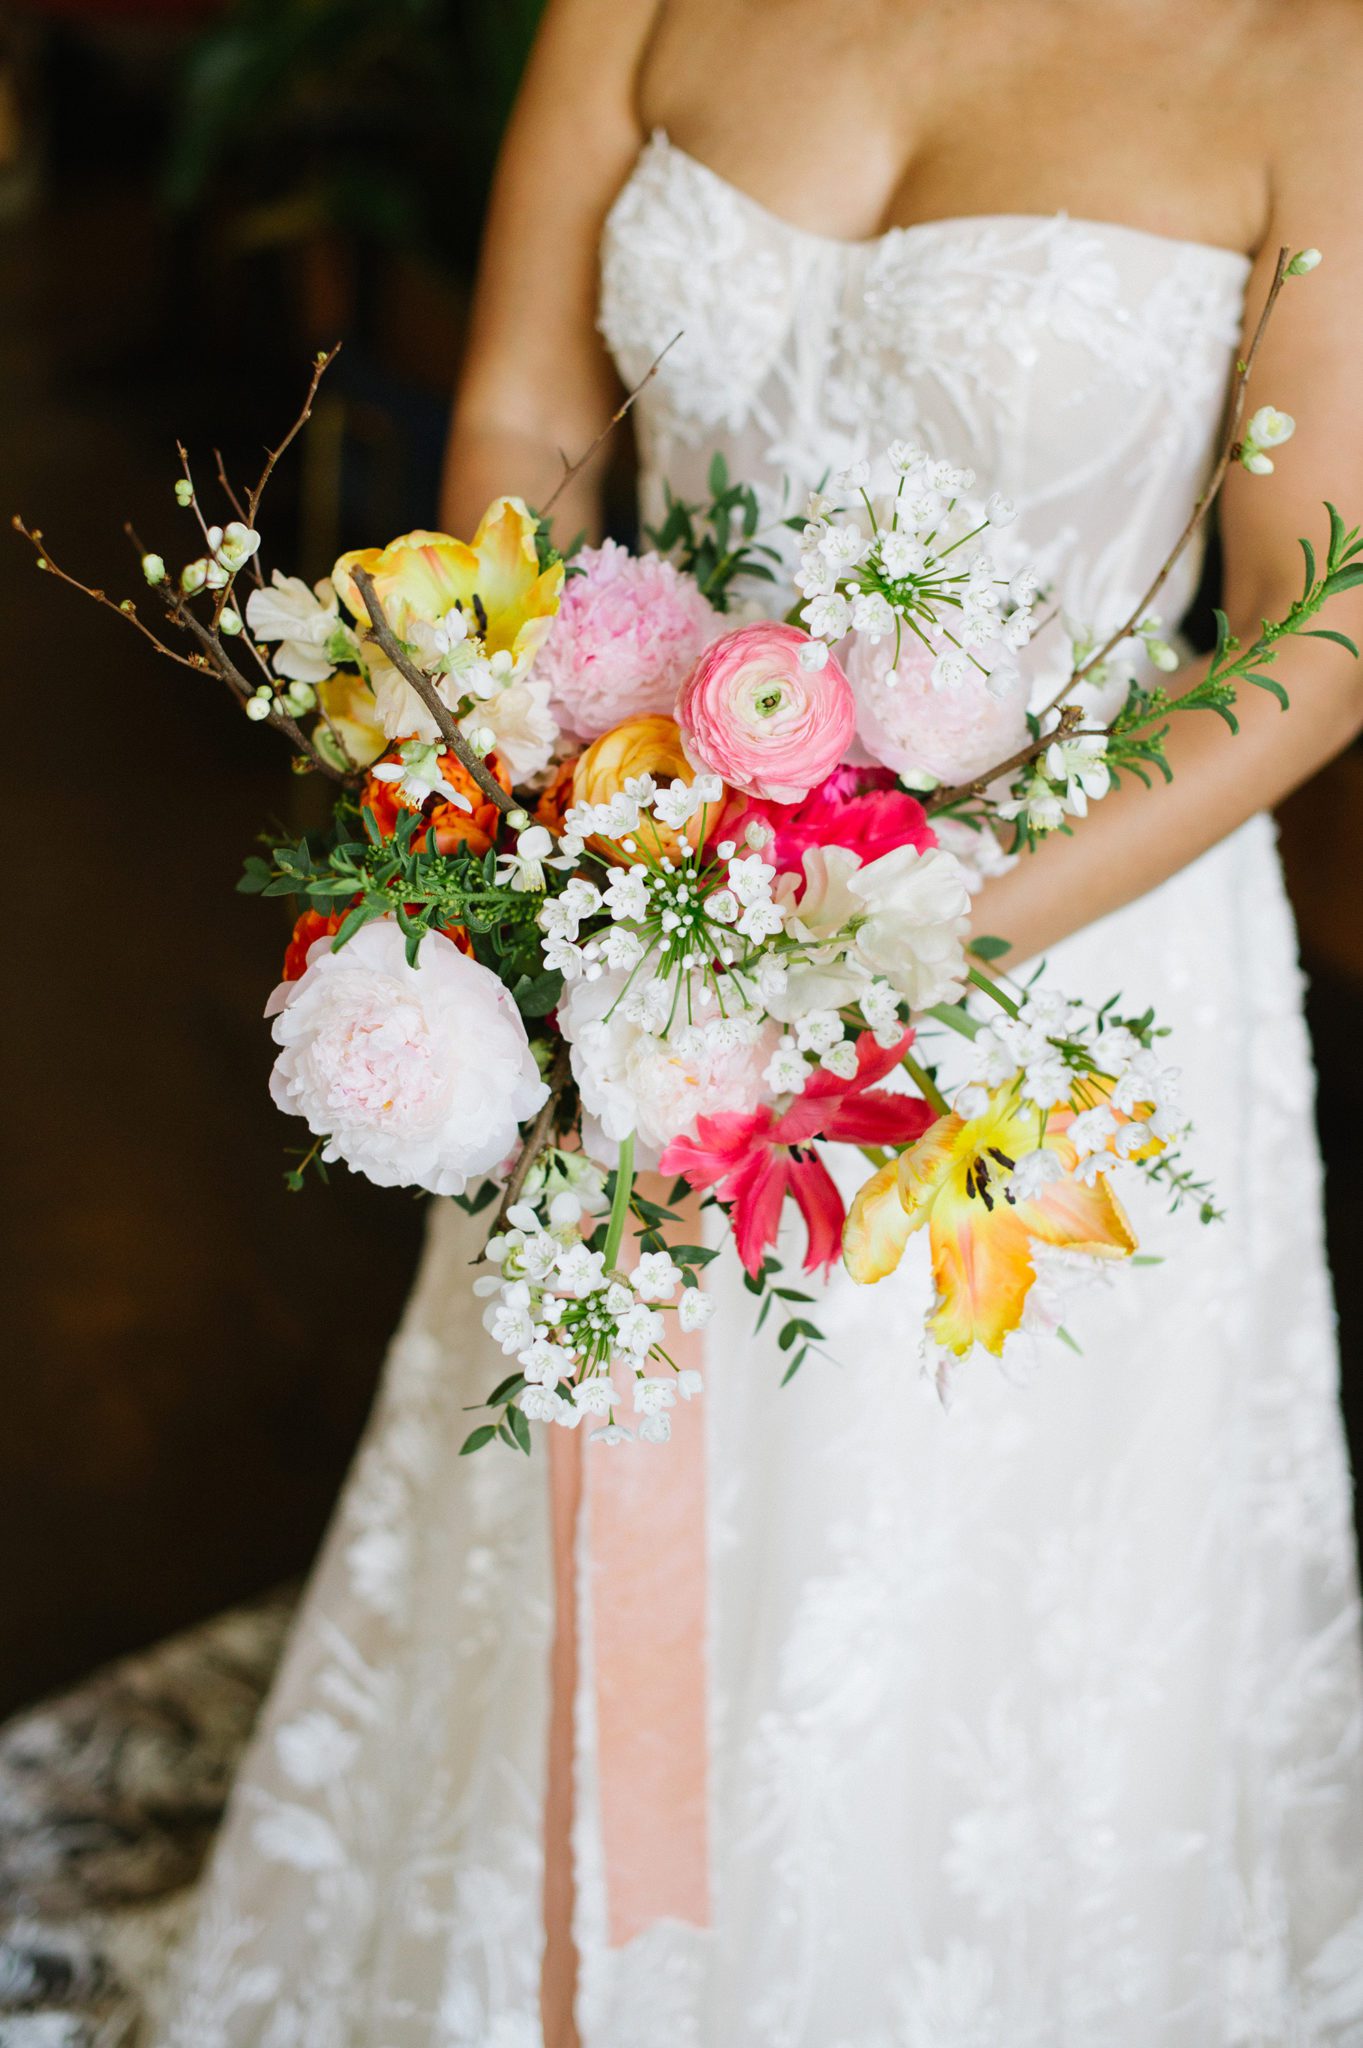 Bright bridal bouquet perfect for a spring wedding